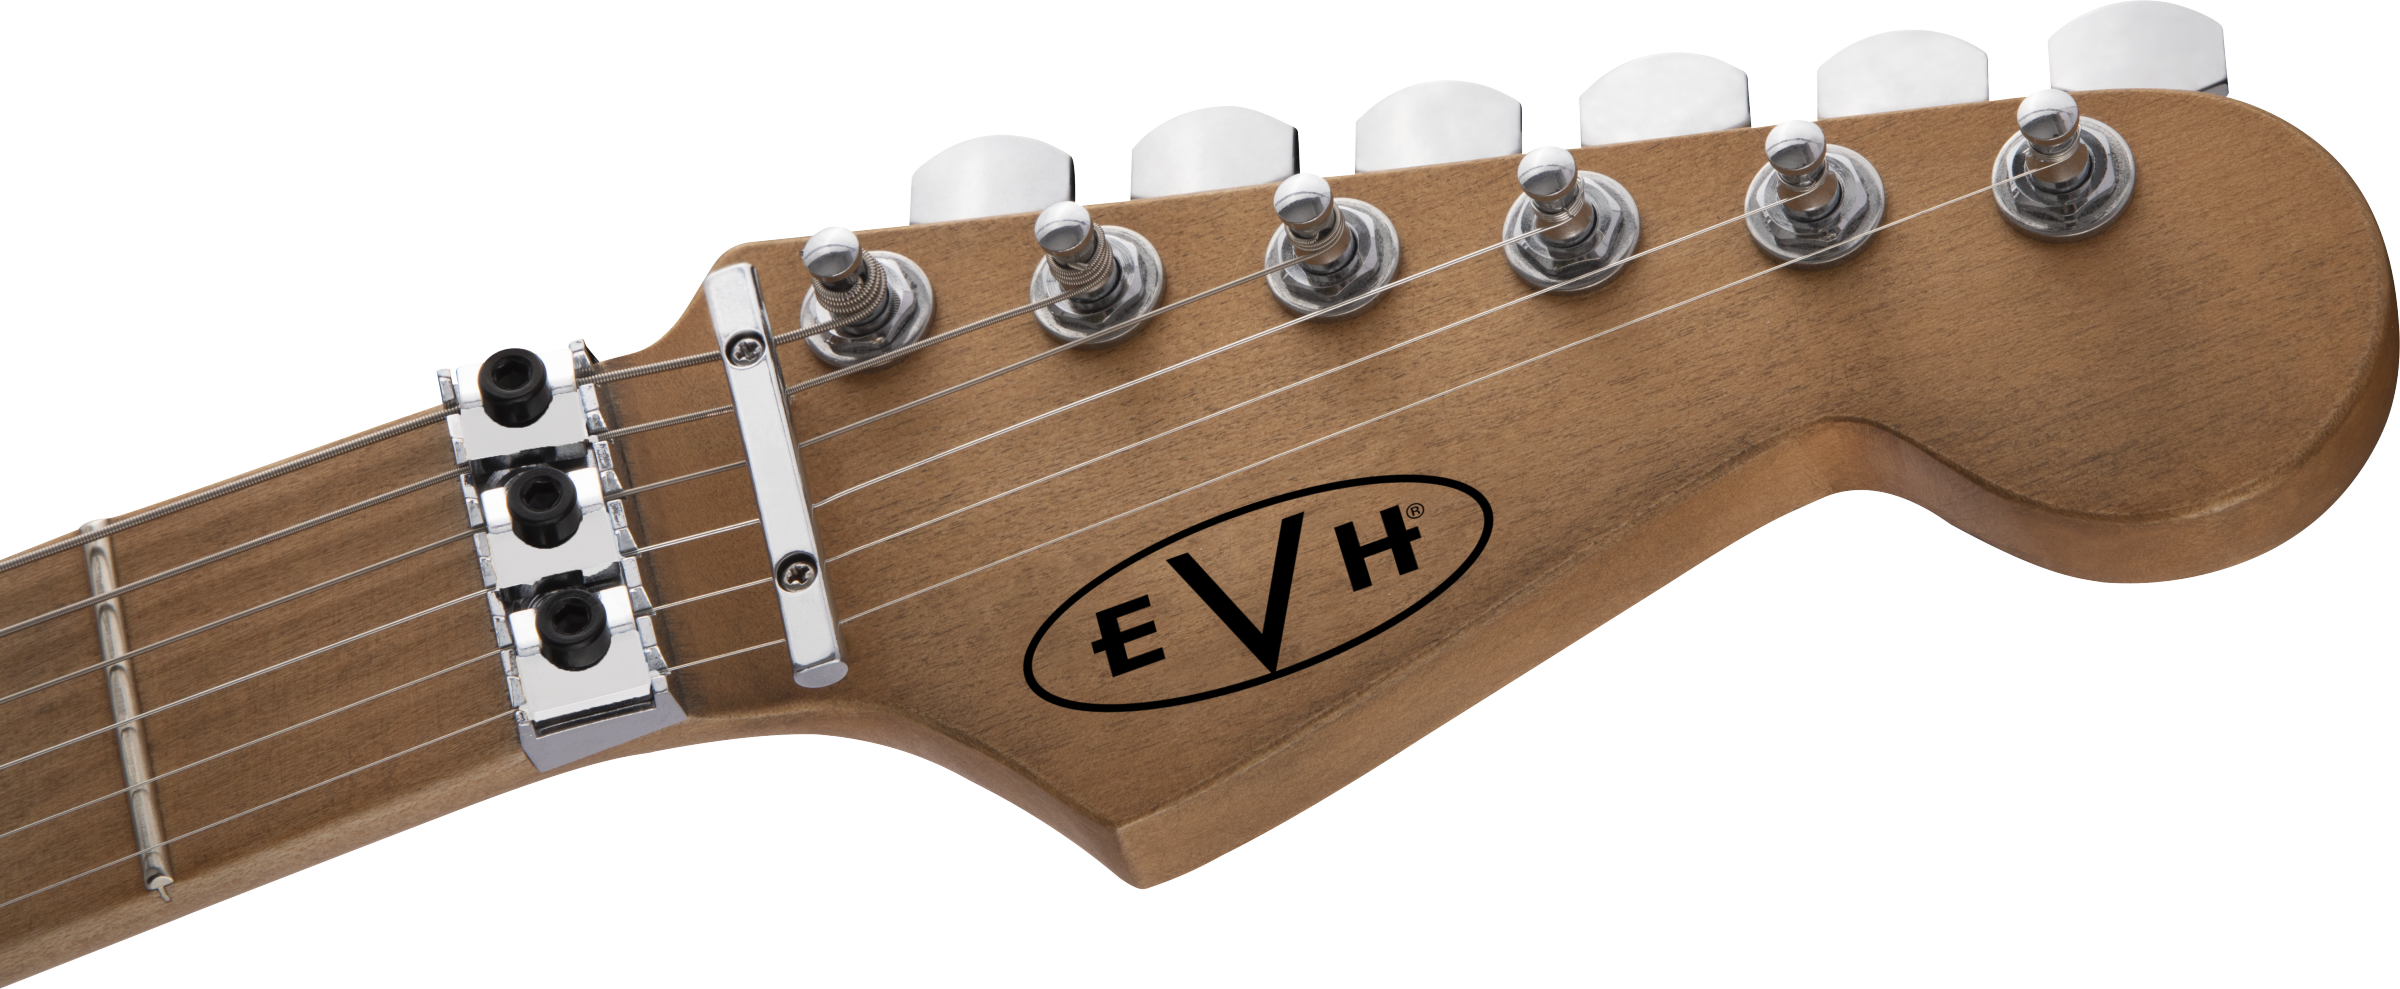 EVH Striped Series Frankie Red - White - Black Relic 5107900503 IN STOCK NOW